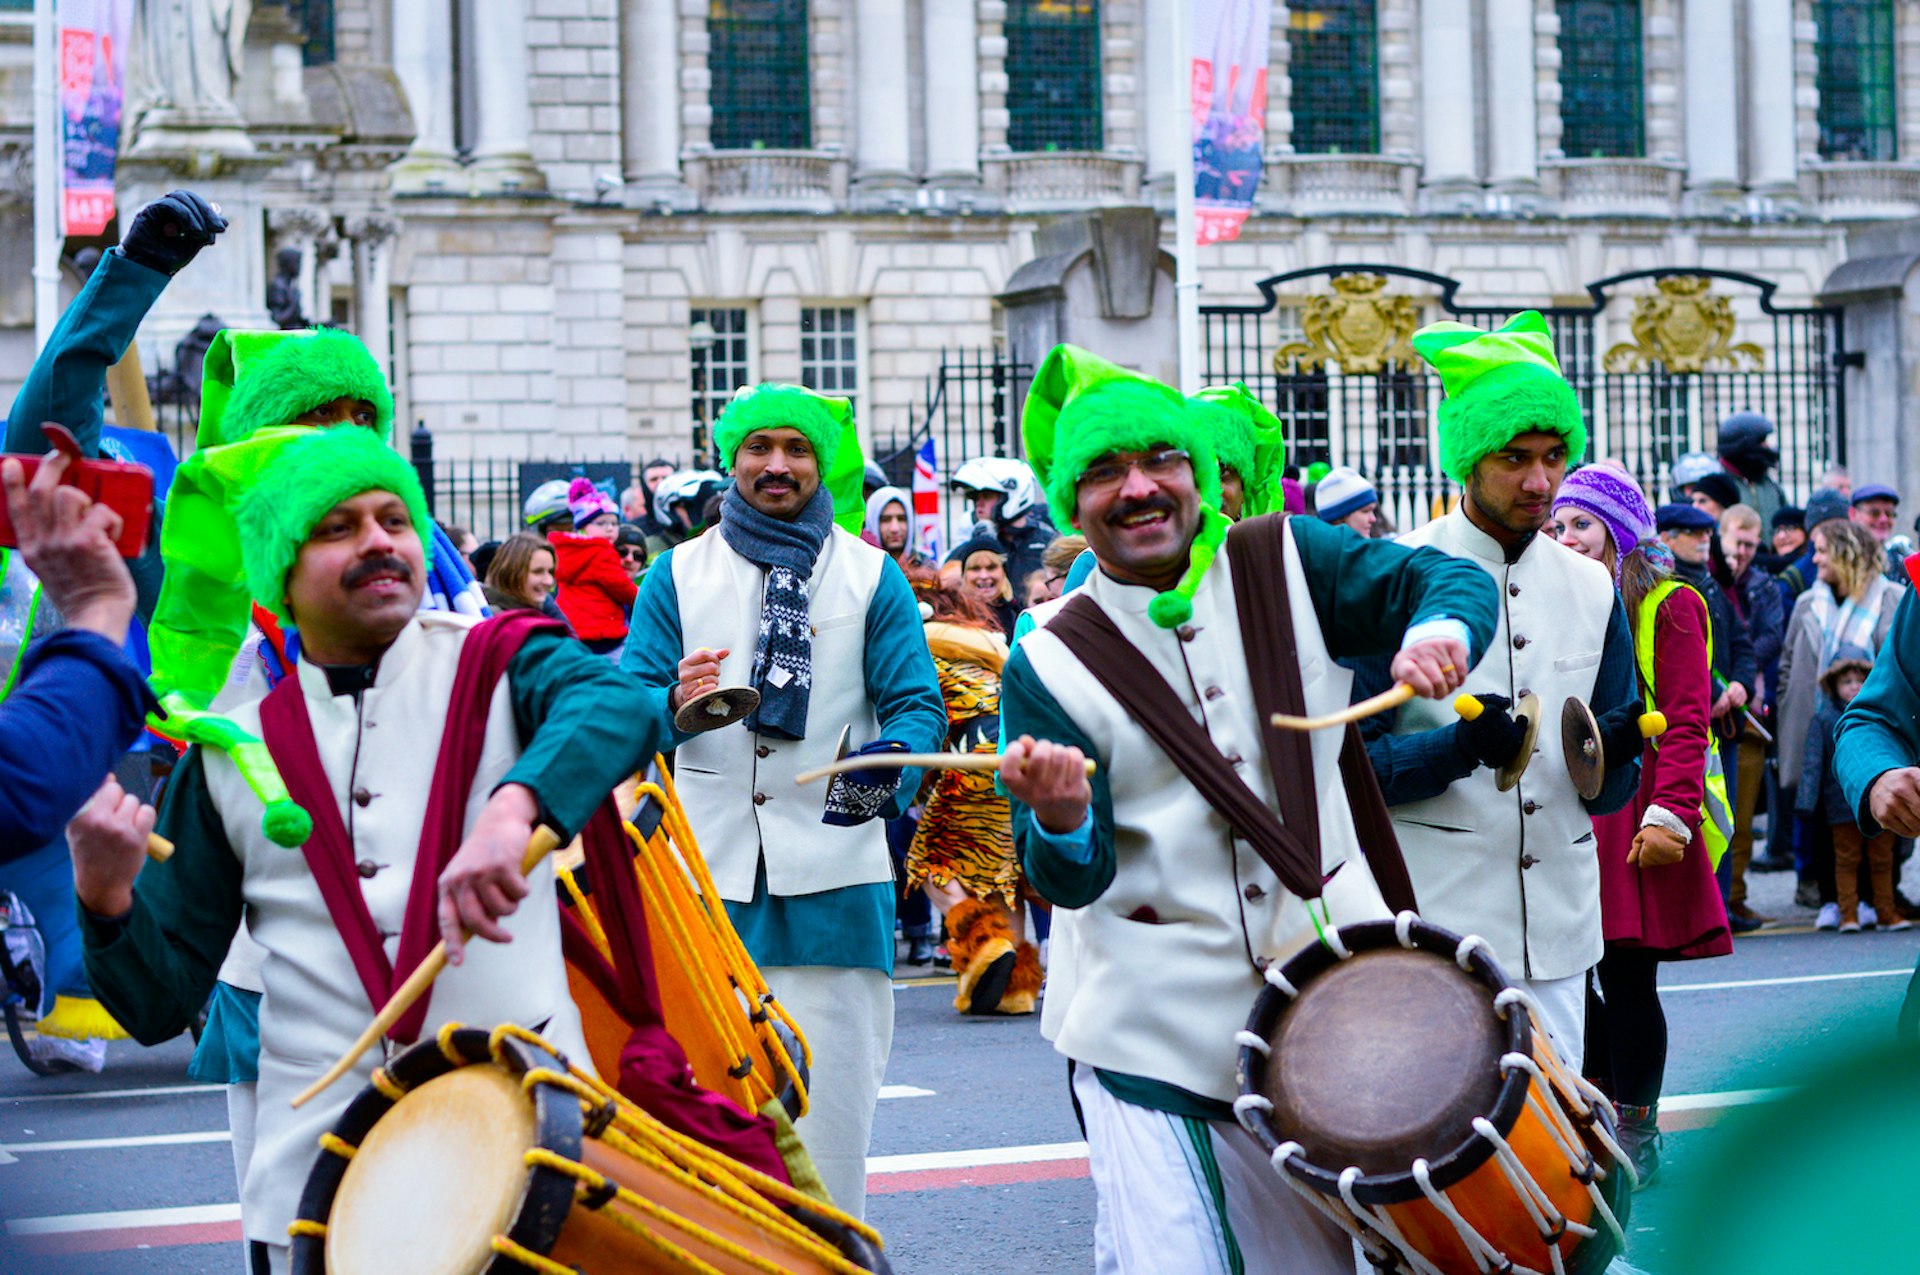 A group of drummers in green wigs take part in St Patrick’s Day celebrations, Belfast, Northern Ireland, United Kingdom